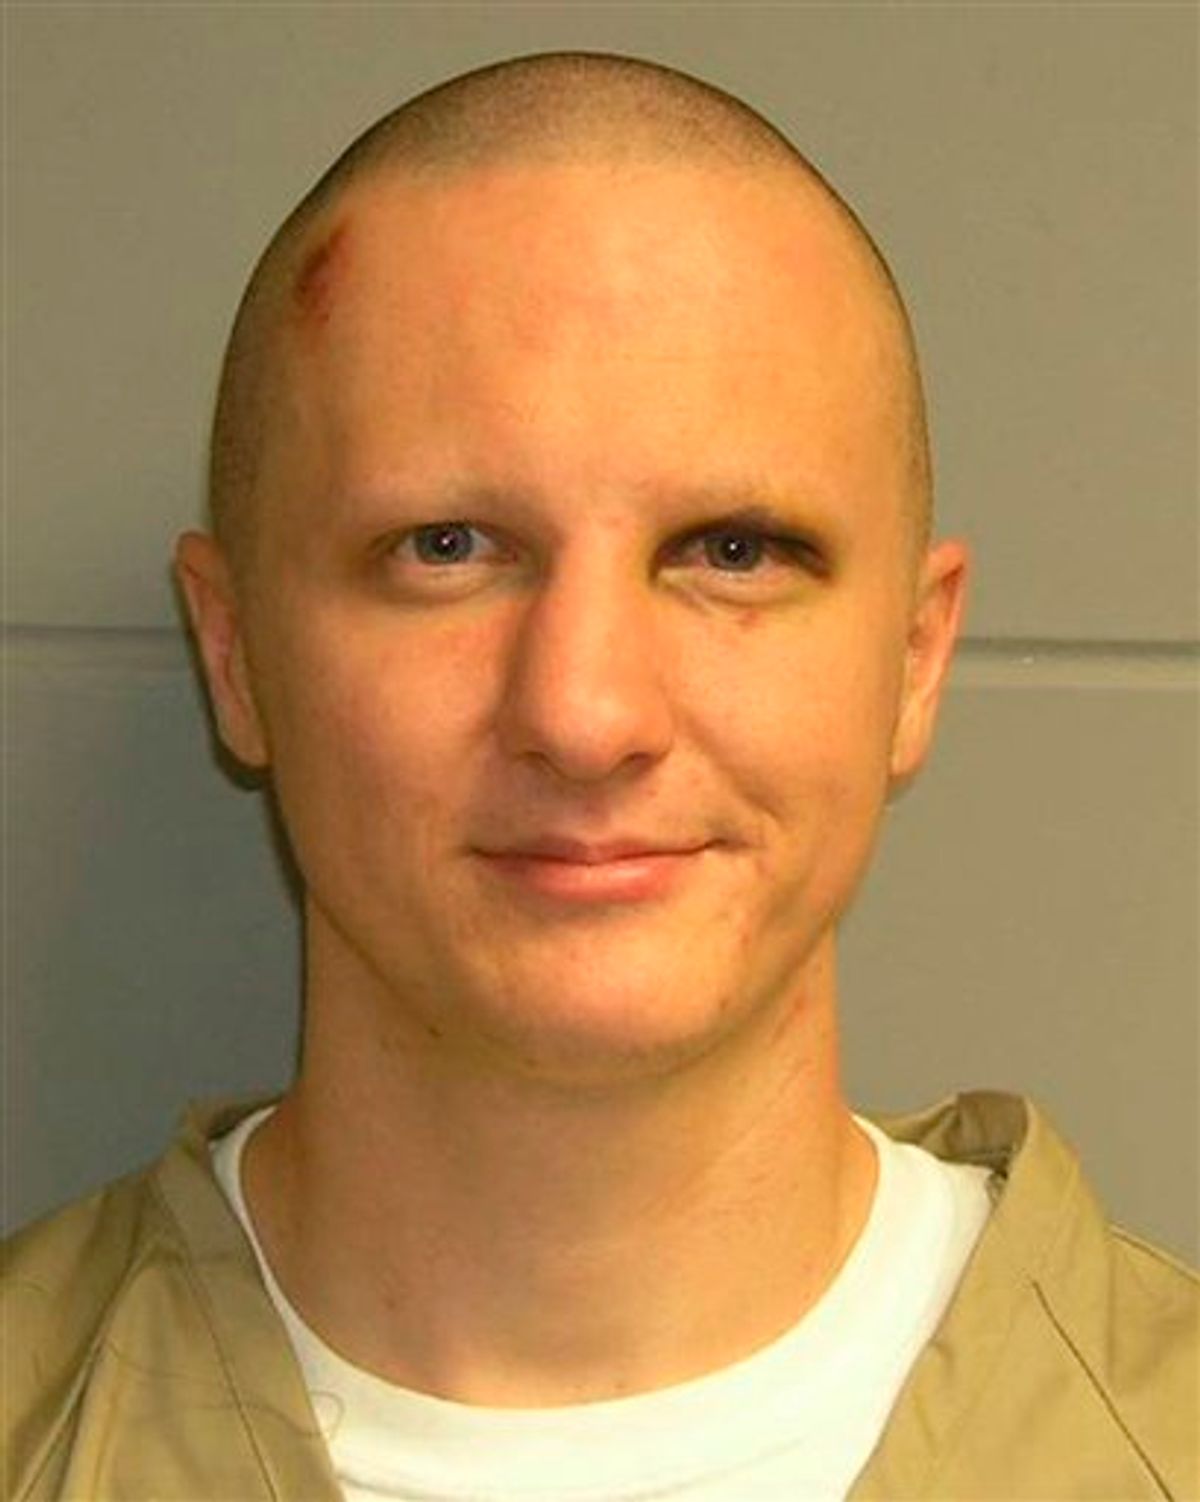 FILE - This photo released Tuesday, Feb. 22, 2011, by the U.S. Marshal's Service shows Jared Loughner. A judge on Wednesday, March 9, 2011 will consider whether to order the suspect in the Tucscon, Ariz., shooting rampage to give handwriting samples to compare with documents seized in a search of his home. (AP Photo/U.S. Marshal's Office, File) (AP)